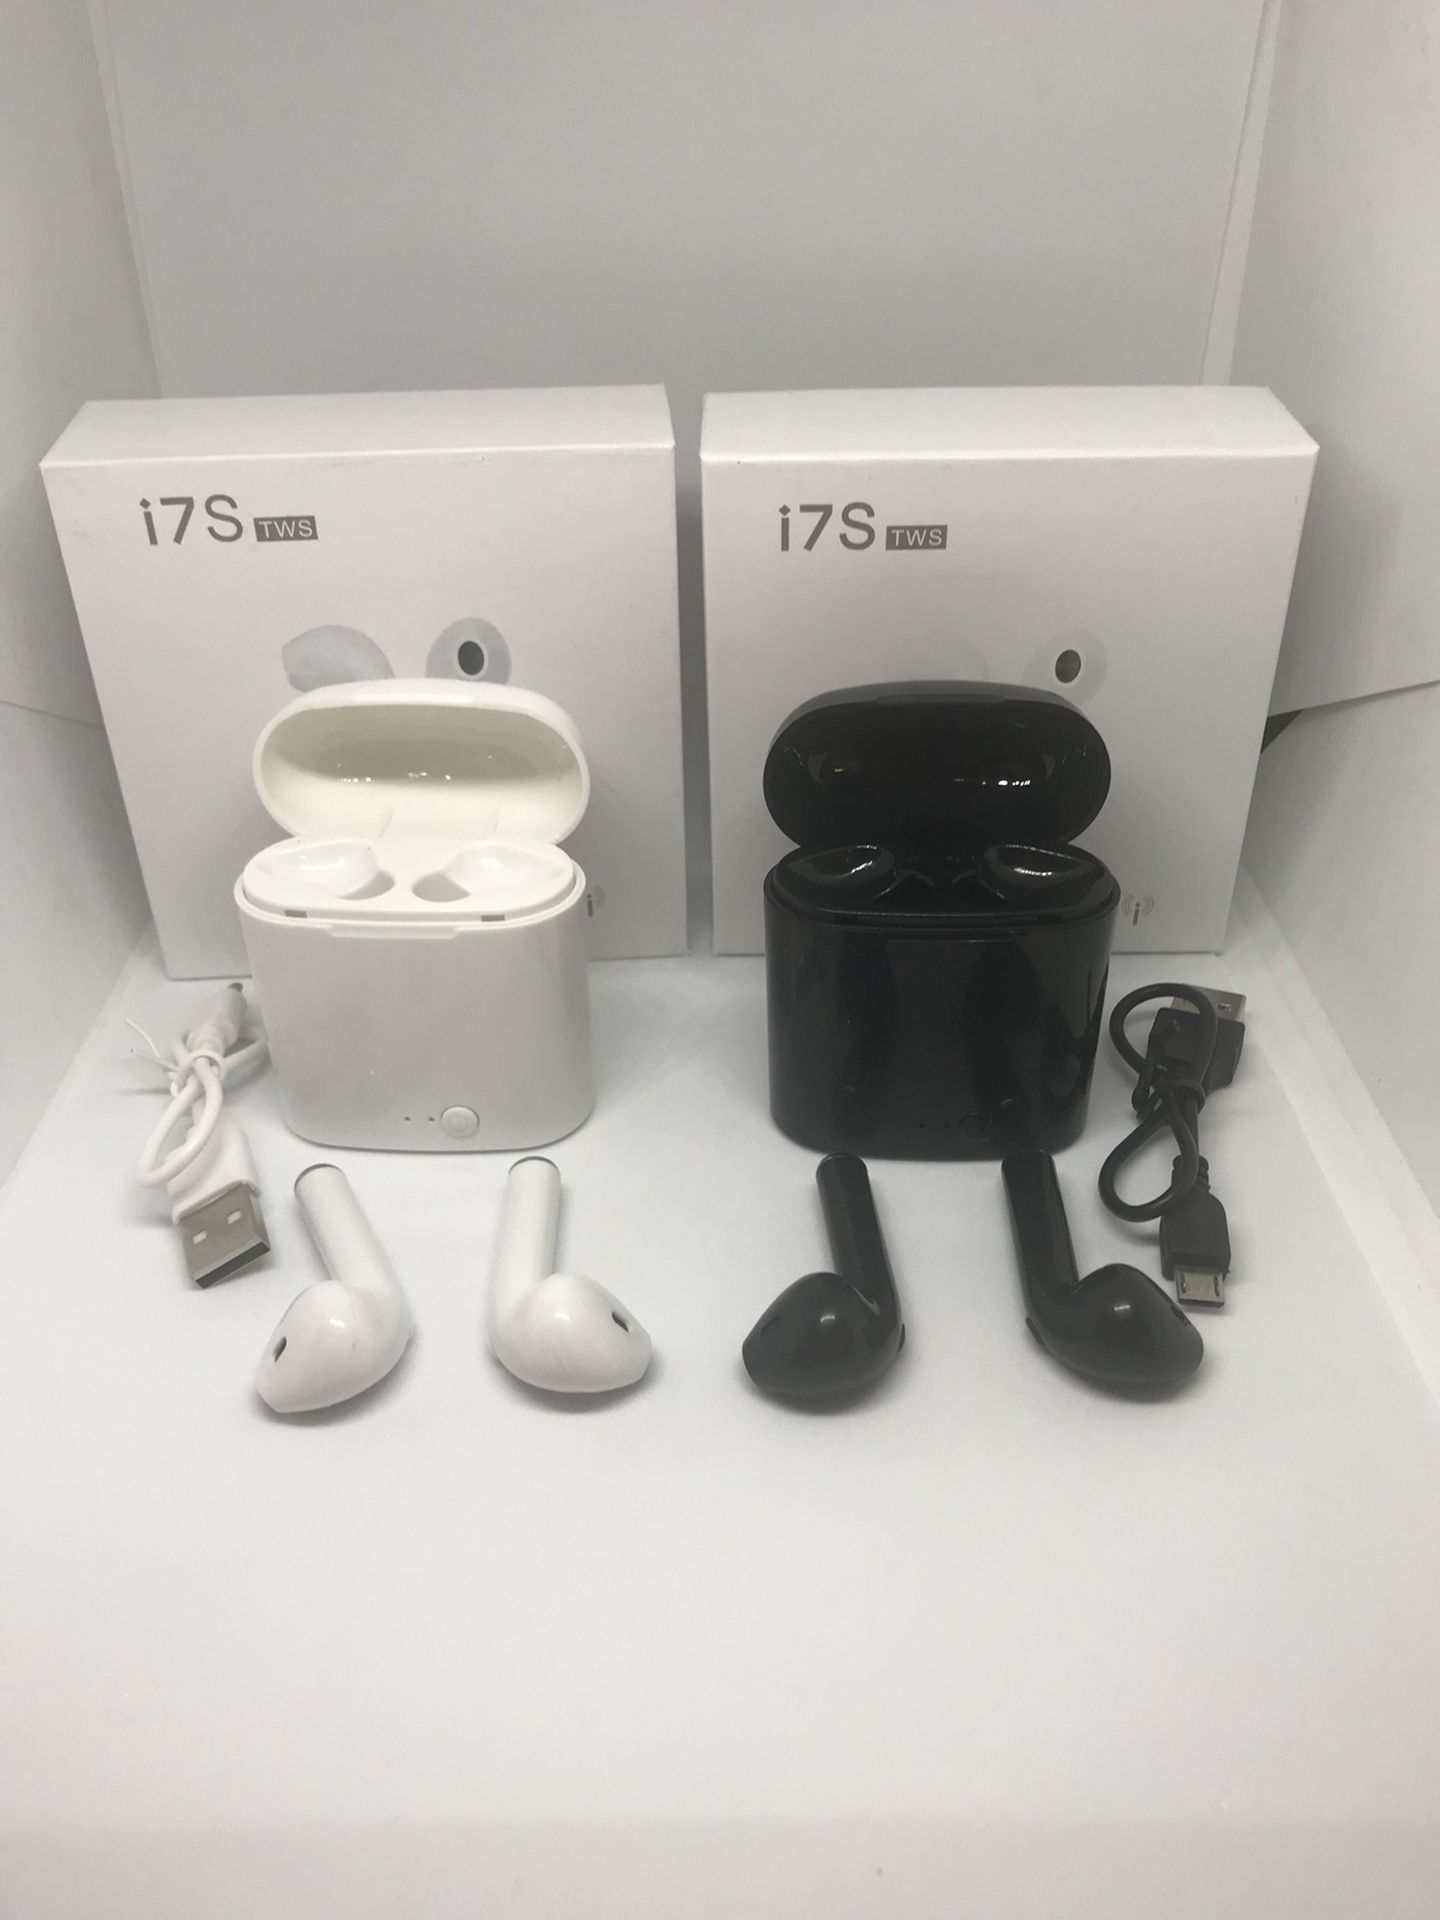 Lot of 2 ( black and white ) i7 Bluetooth wireless headphones earbuds audifonos.